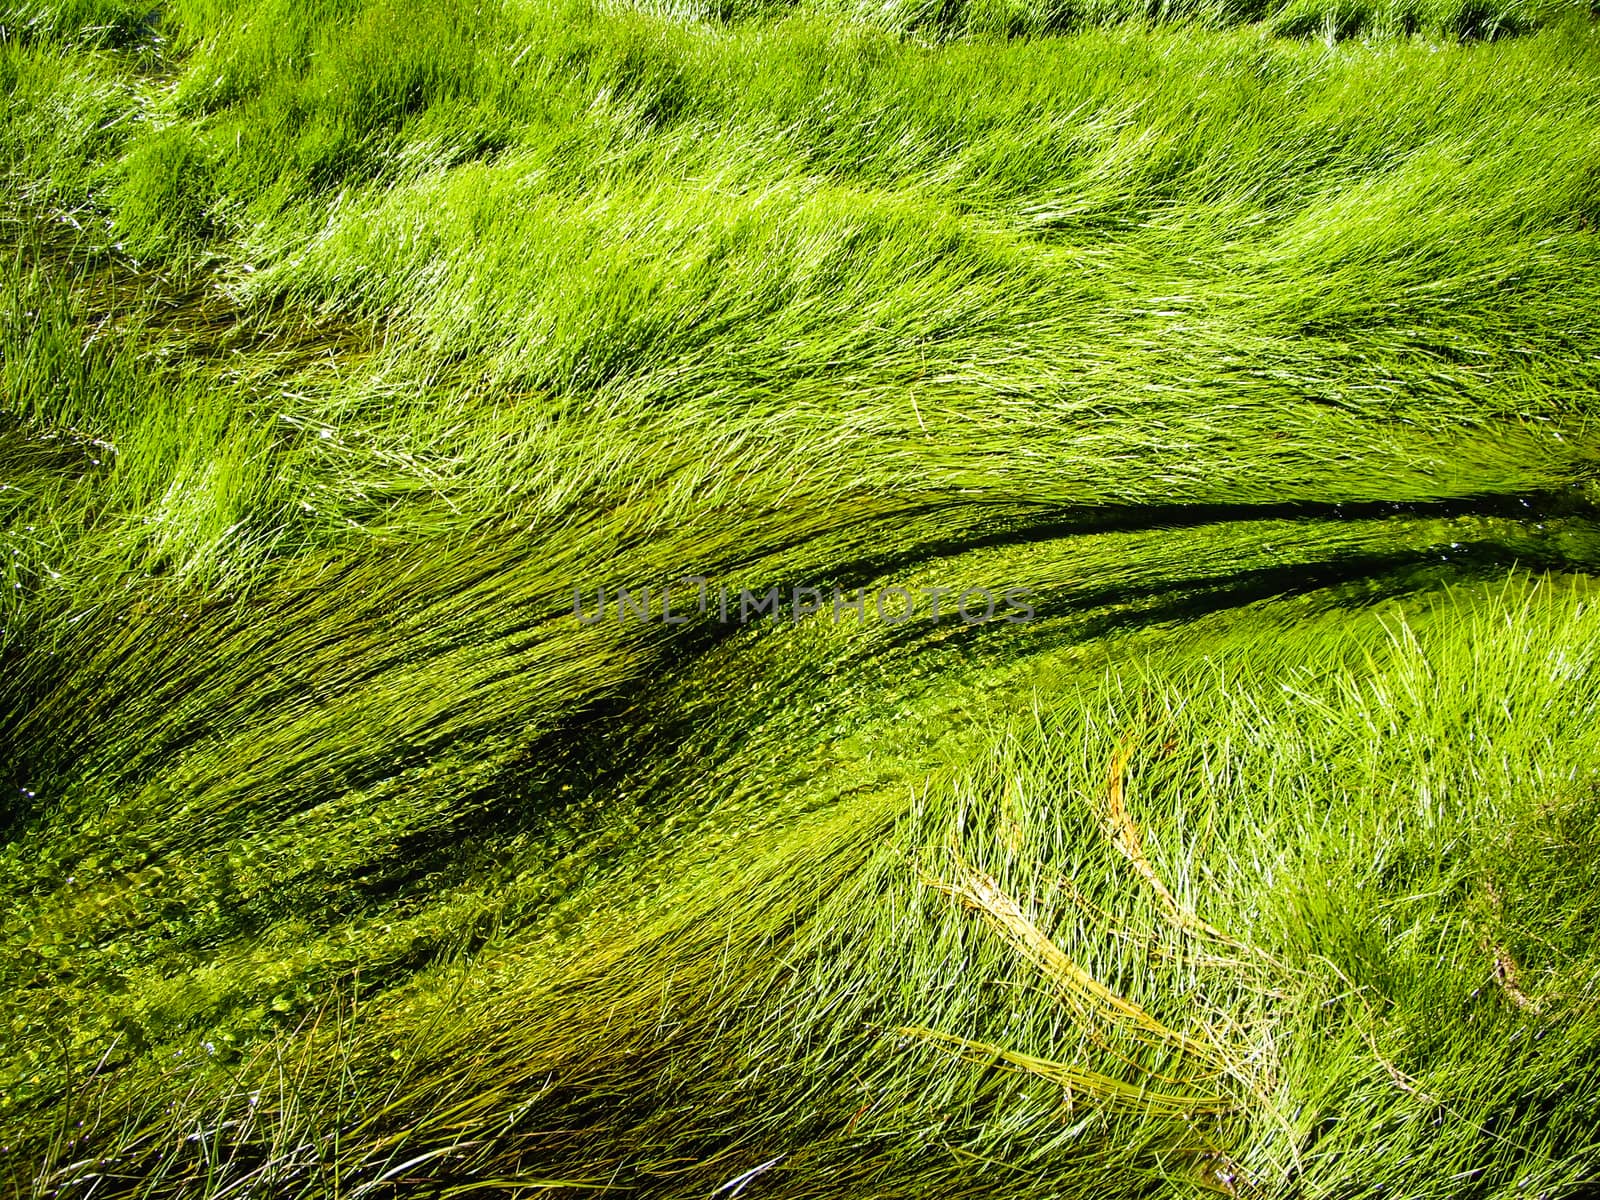 Grass in thermal rivers of Yellowstone by emattil